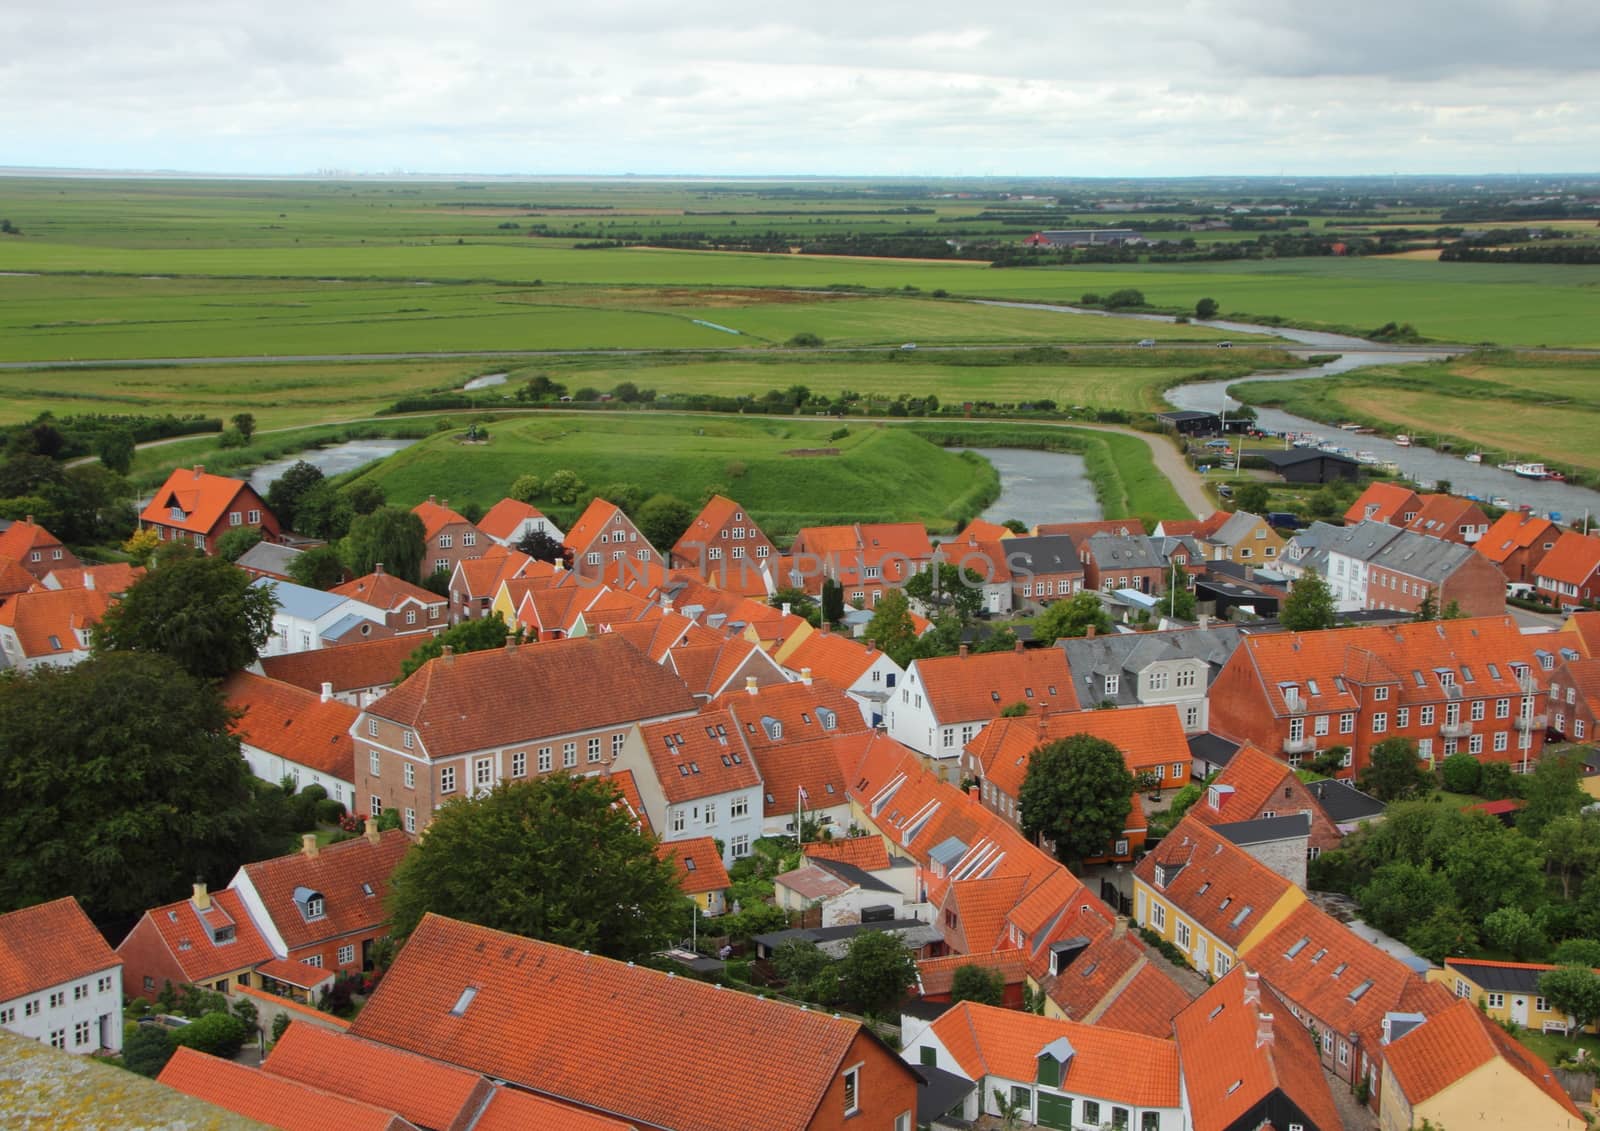 Aerial Perspective of Red Roof Urban Settlement with Green Fields